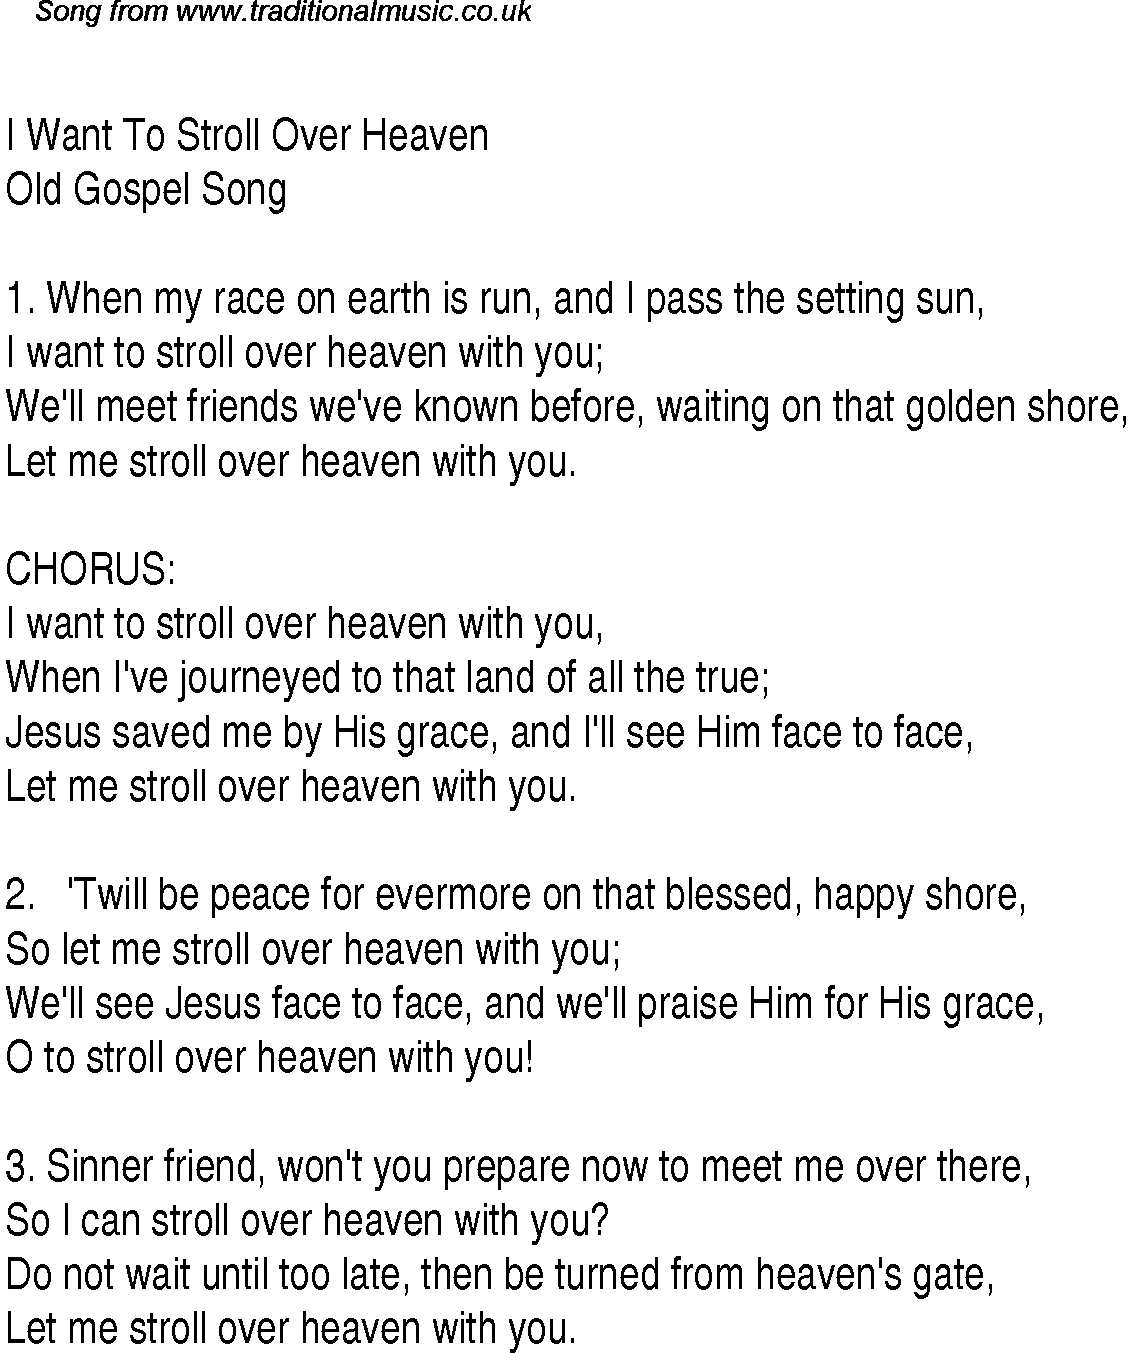 I Want To Stroll Over Heaven With You Lyrics - If i survey all the good